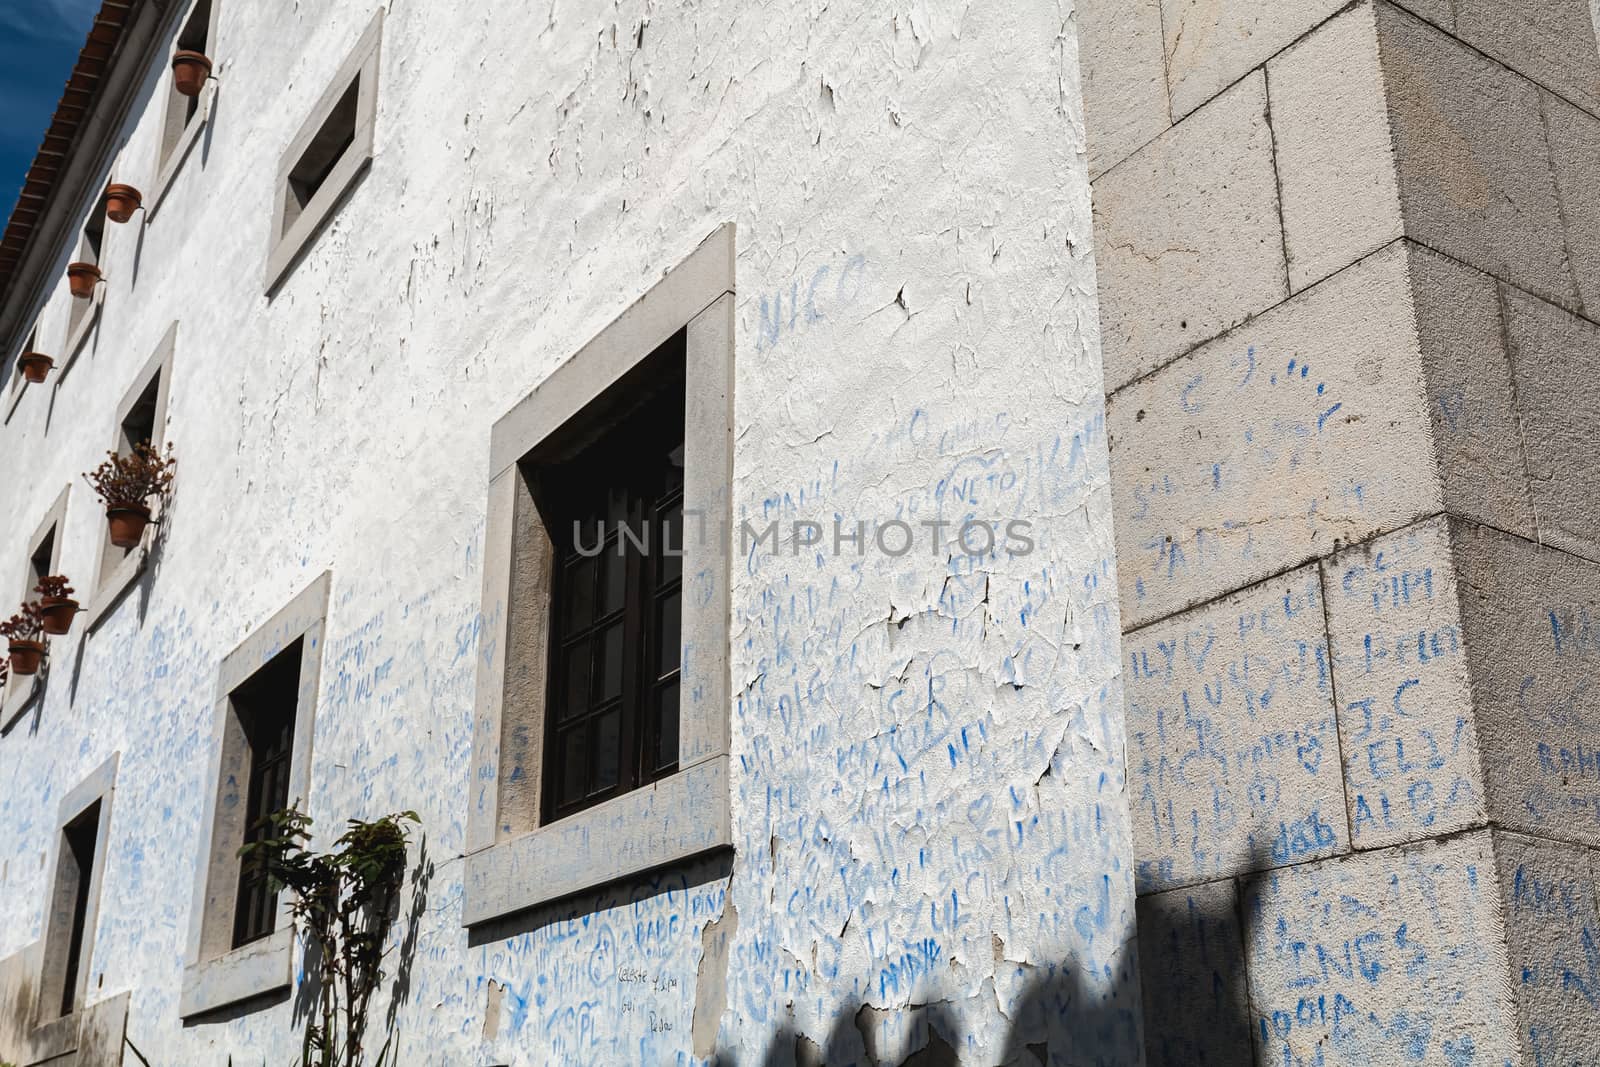 Obidos, Portugal - April 12, 2019: Wall covered with blue signatures in the historic city center on a spring day